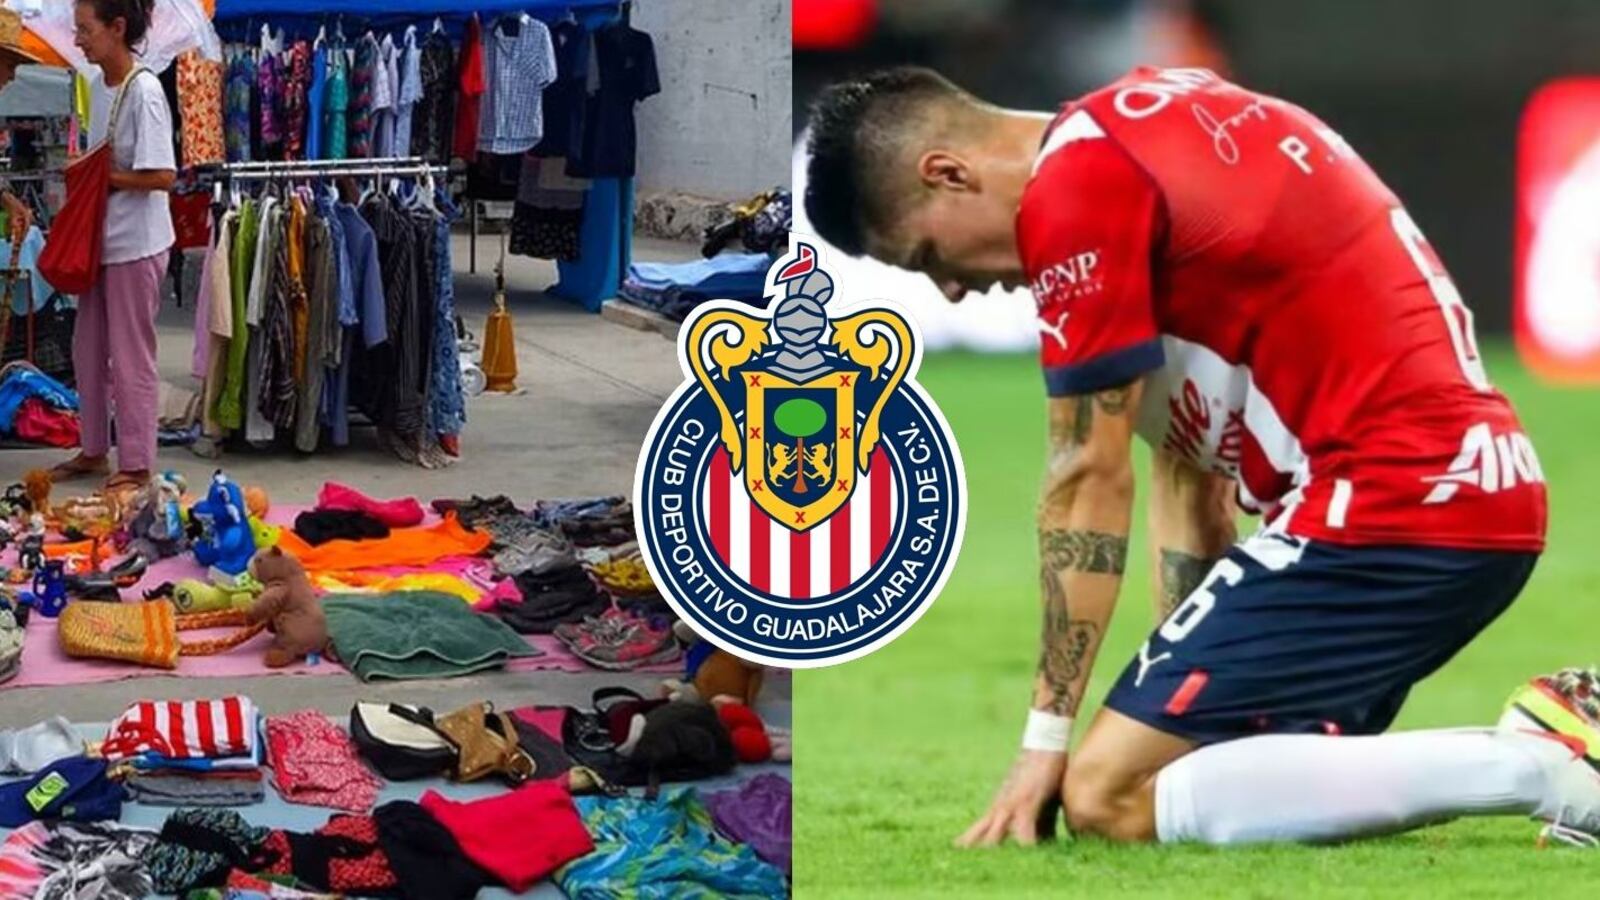 Arrived as a star at Chivas, the party defeated him, now he sells clothes